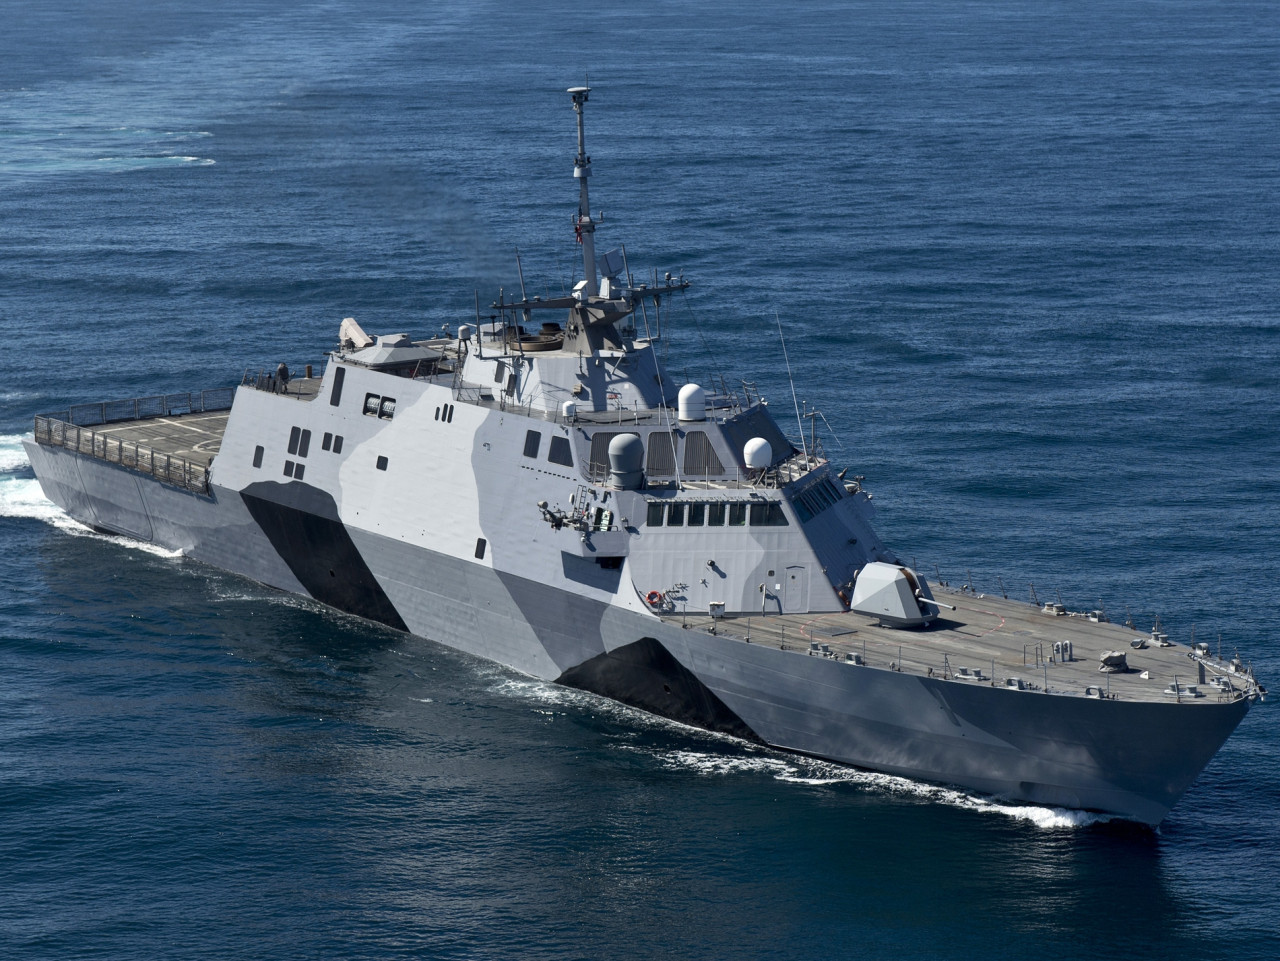 Mohamad and Liew Chin Tong have called on Datuk Seri Ismail Sabri Yaakob to publish all details of the committee’s findings on the littoral combat ship project for the people to judge and evaluate. – File pic, May 12, 2021